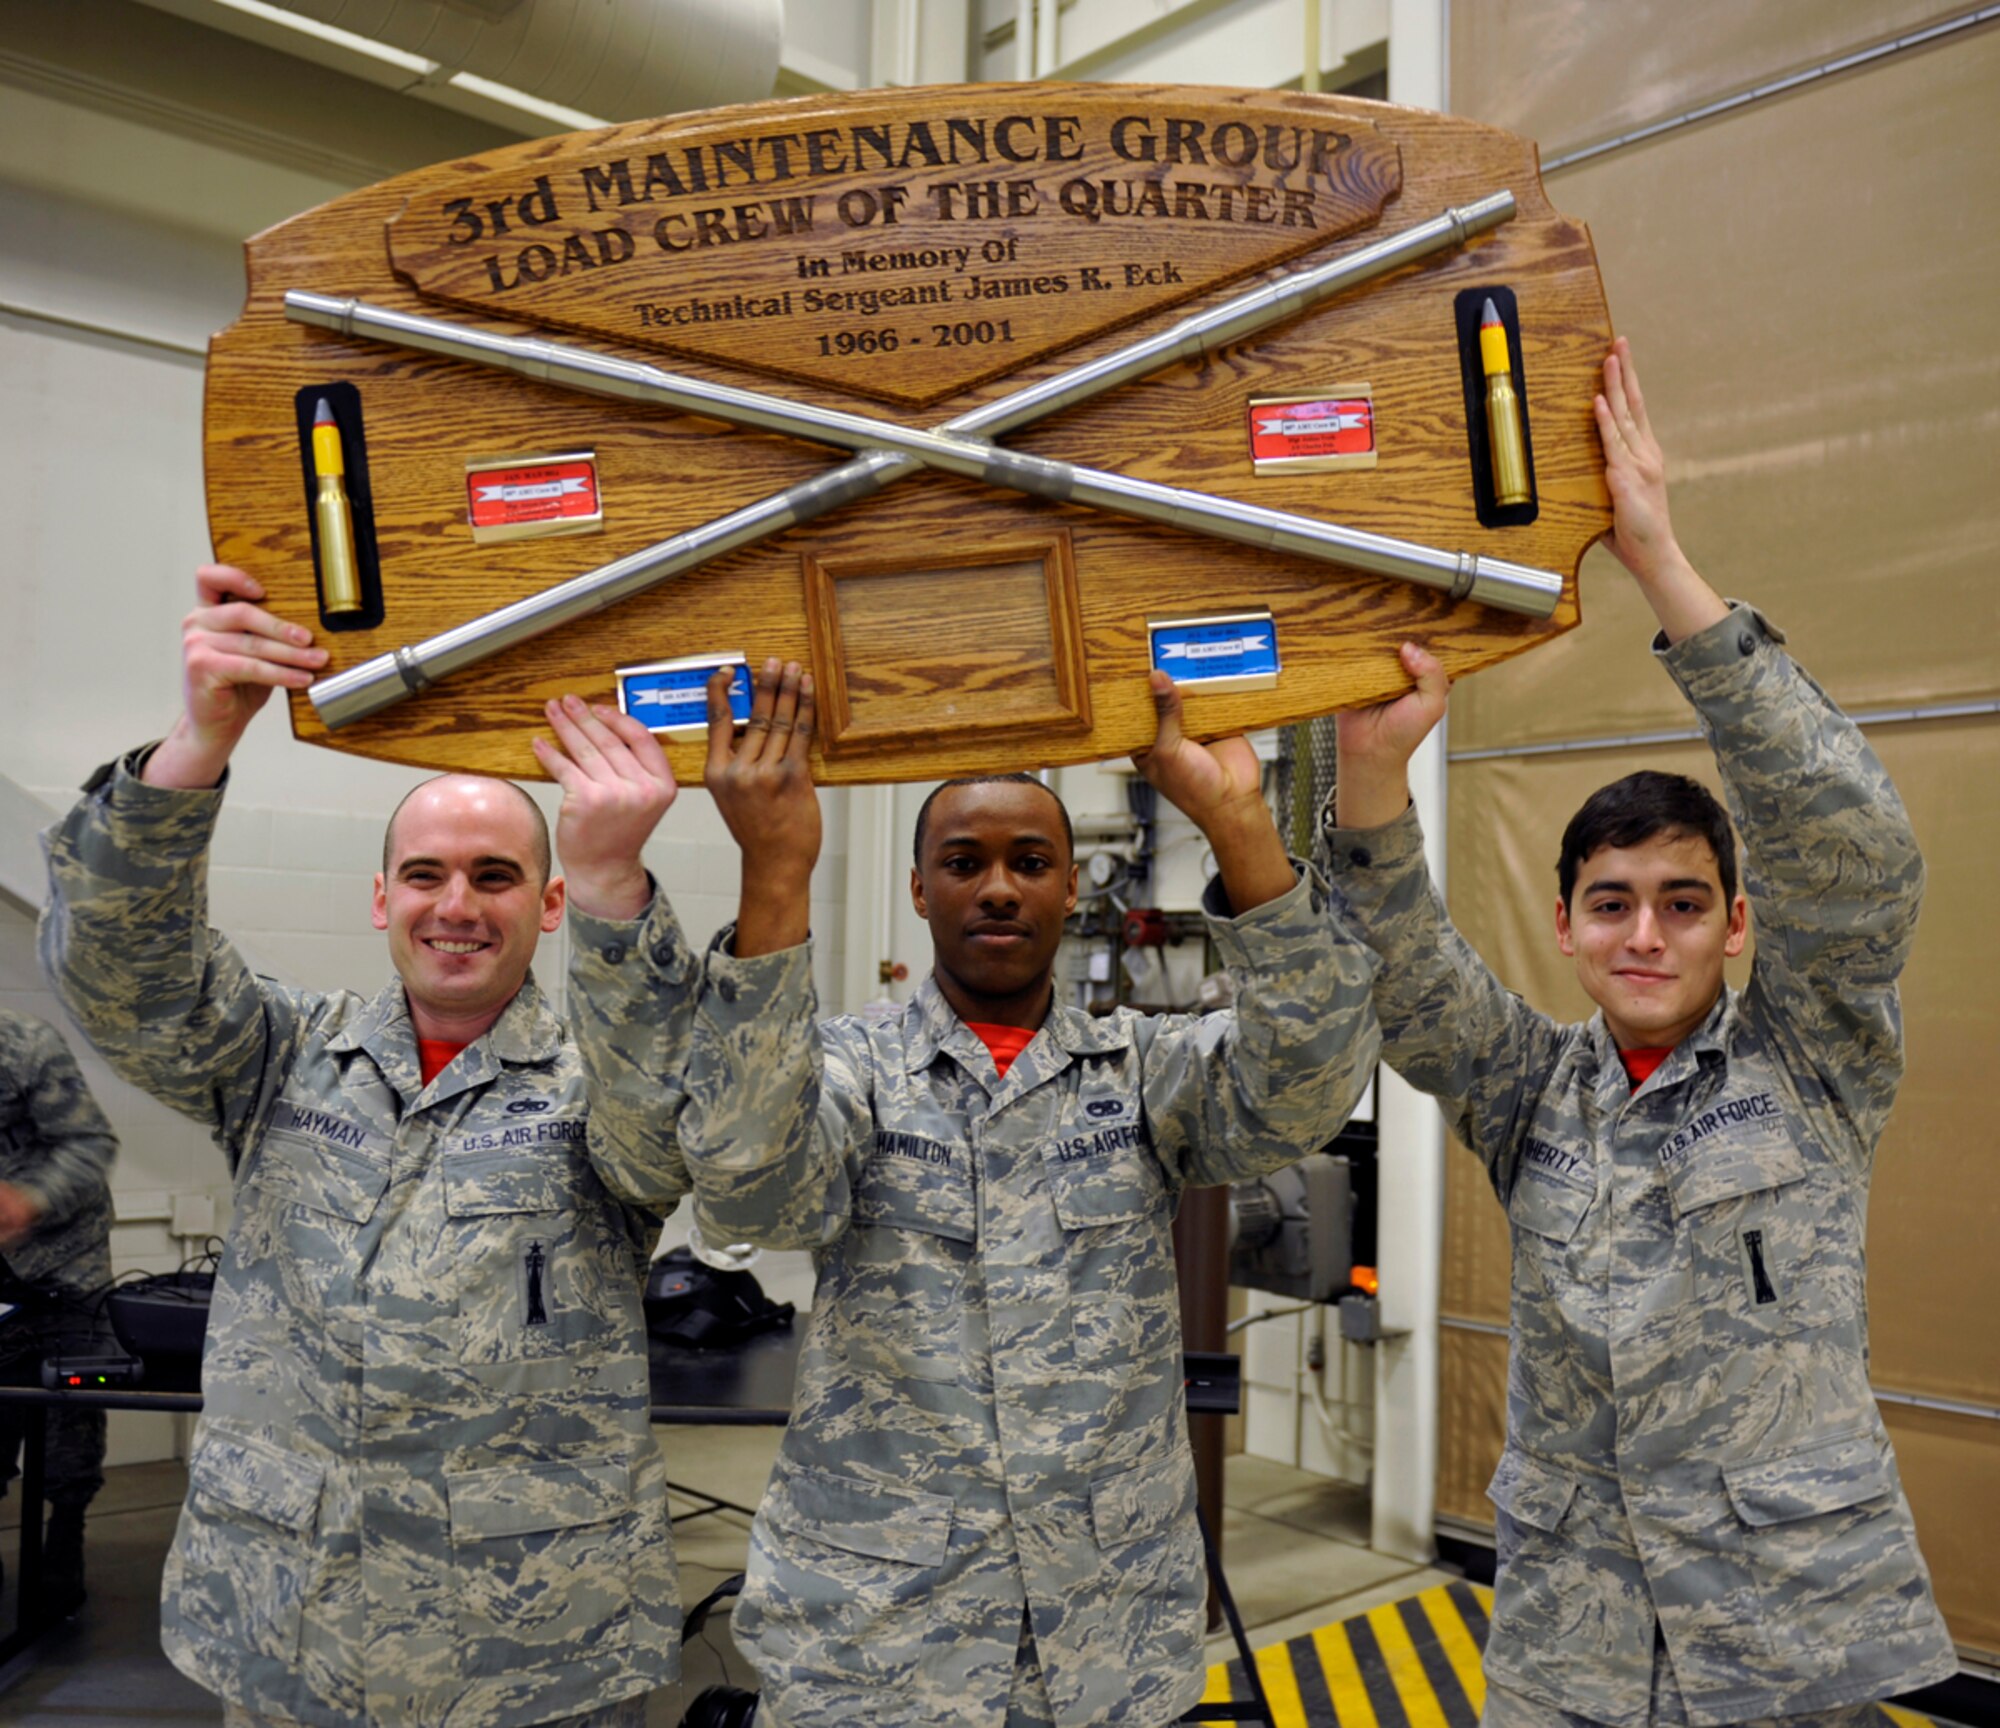 The 90th Aircraft Maintenance Unit load crew lifts the 3rd Maintenance Group Load Crew of the Quarter award after a load competition on Joint Base Elmendorf-Richardson, Alaska, April 18, 2014. The 90th and 525th aircraft maintenance units train regularly to be proficient at their jobs, including competing in quarterly loading competitions. (U.S. Air Force photo/Airman 1st Class Tammie Ramsouer)